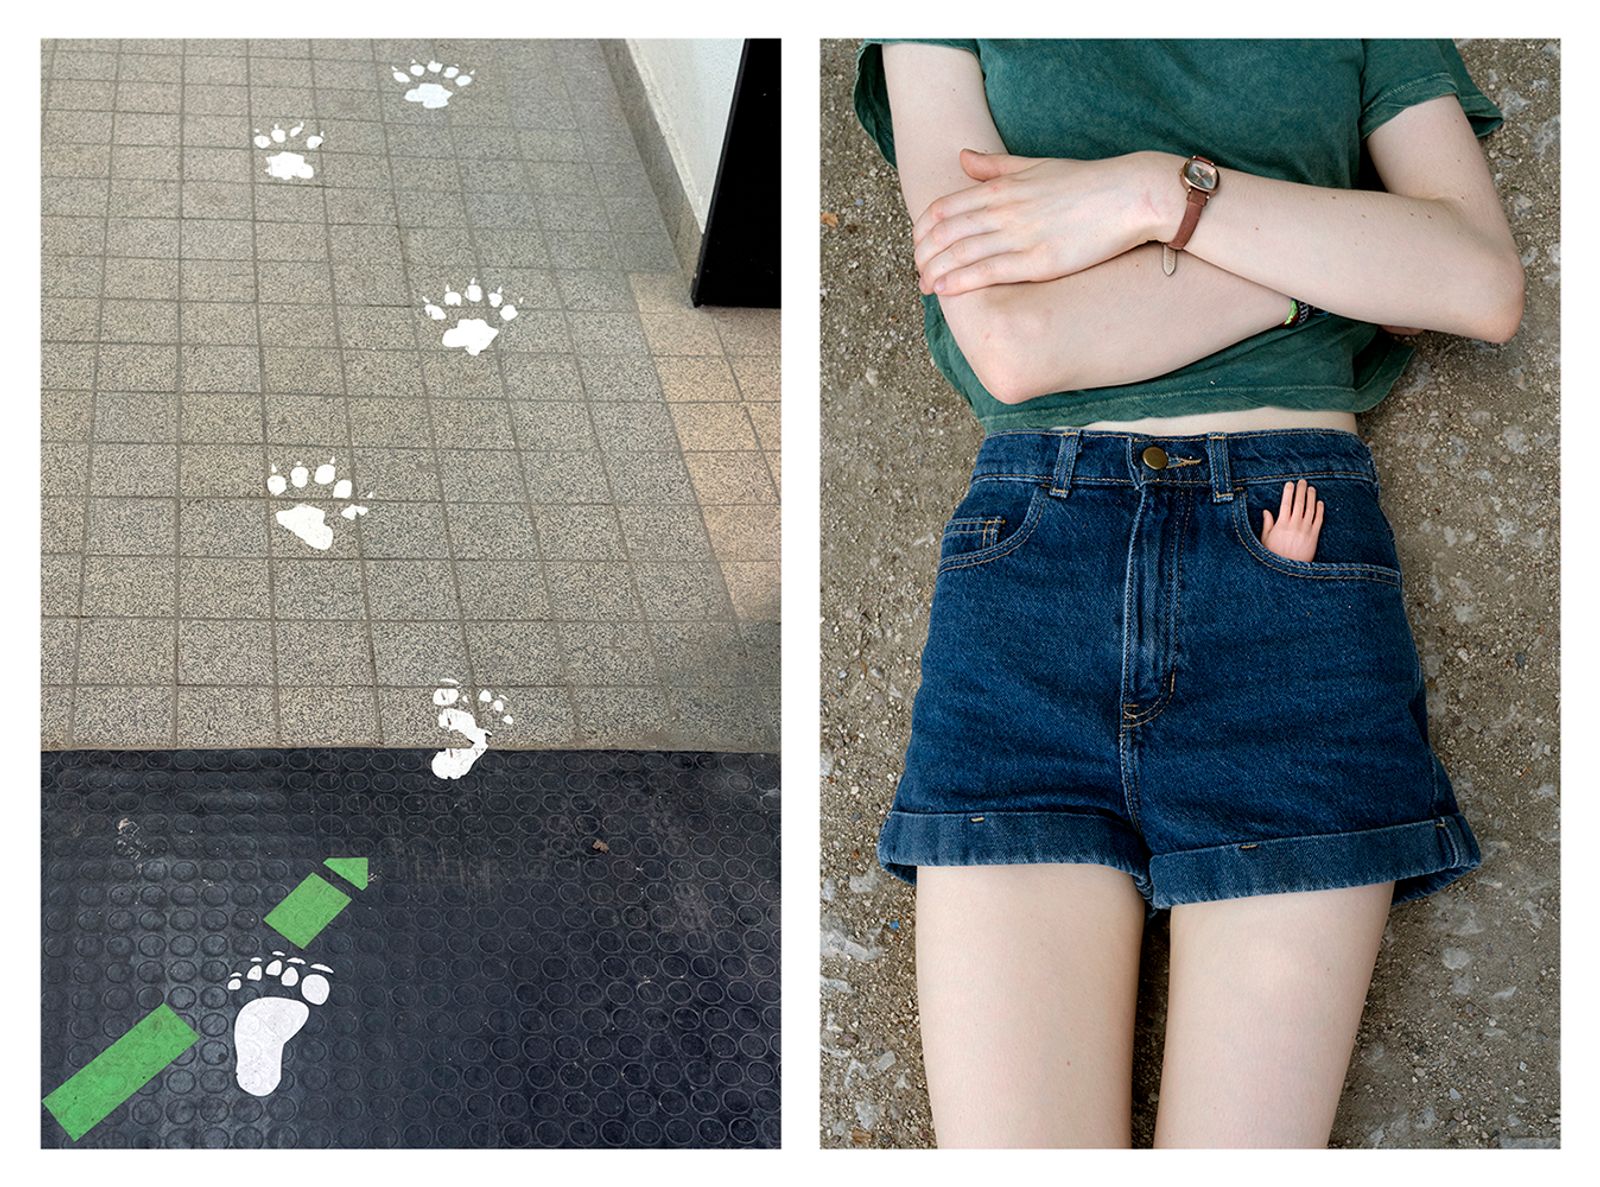 © Ute Behrend - Footprints and Paw prints & Little plastic hand